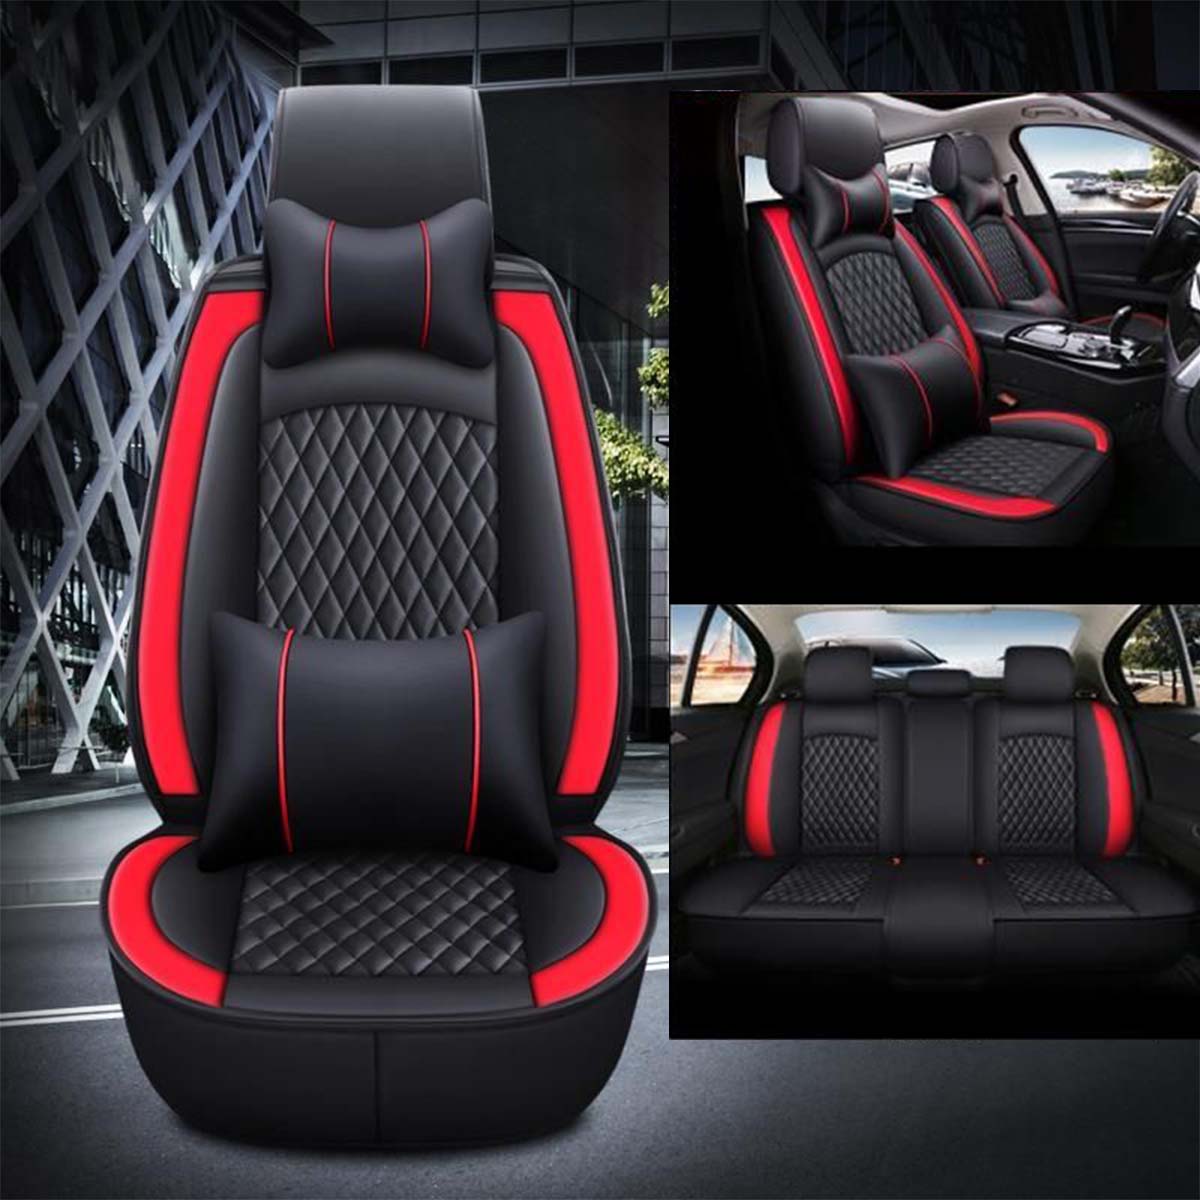 Lincoln Car Seat Covers Full Set: Complete Protection and Style for Your Vehicle